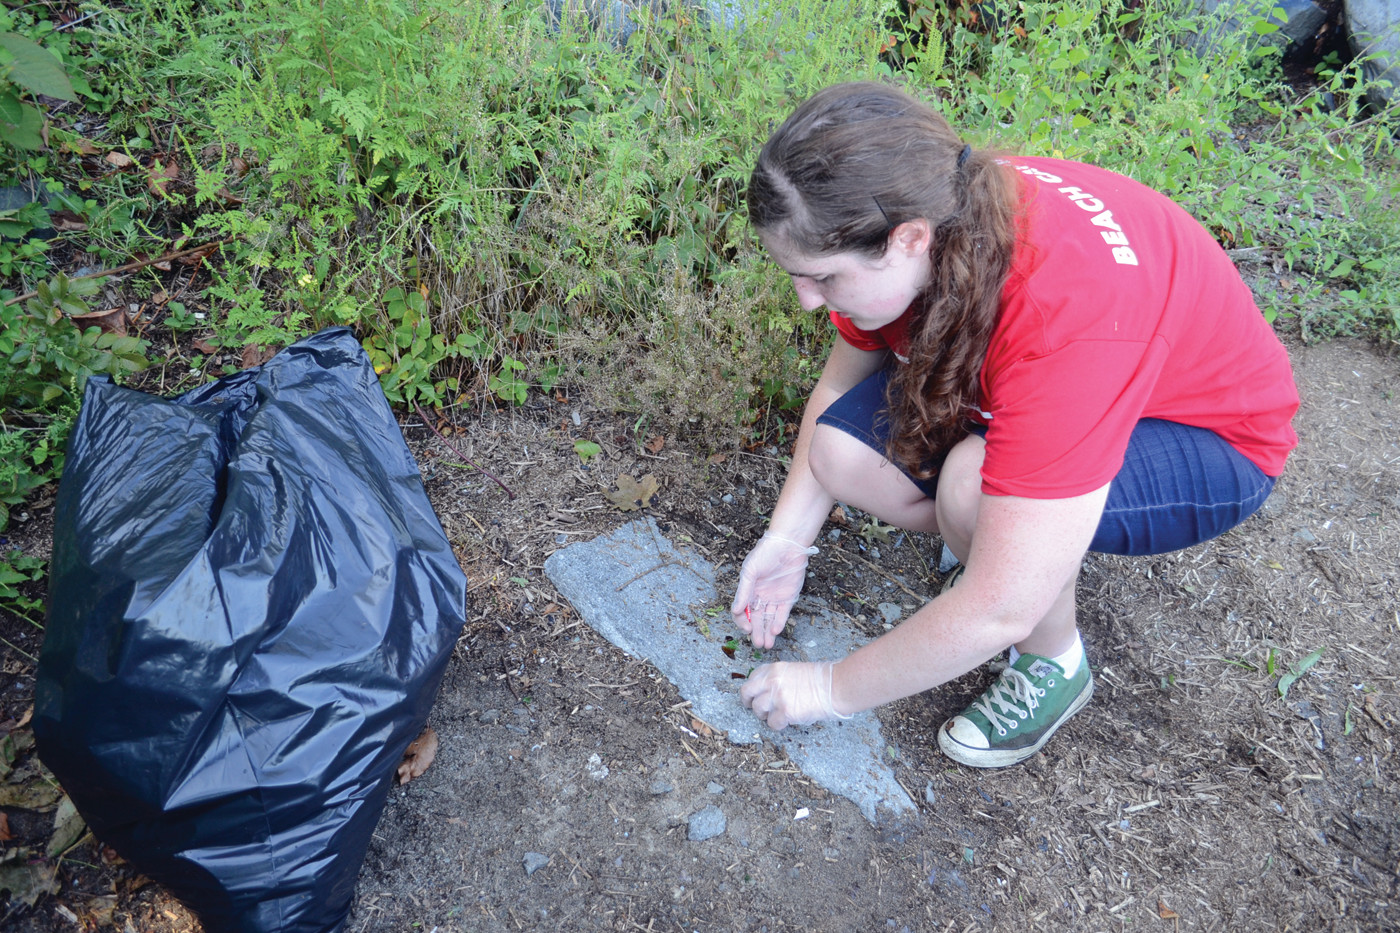 EVERY LITTLE BIT MATTERS: Debbie Woolley, working as part of a volunteer management coordinator internship with Save the Bay, picks up little shards of glass off a walking path at Salter Grove.